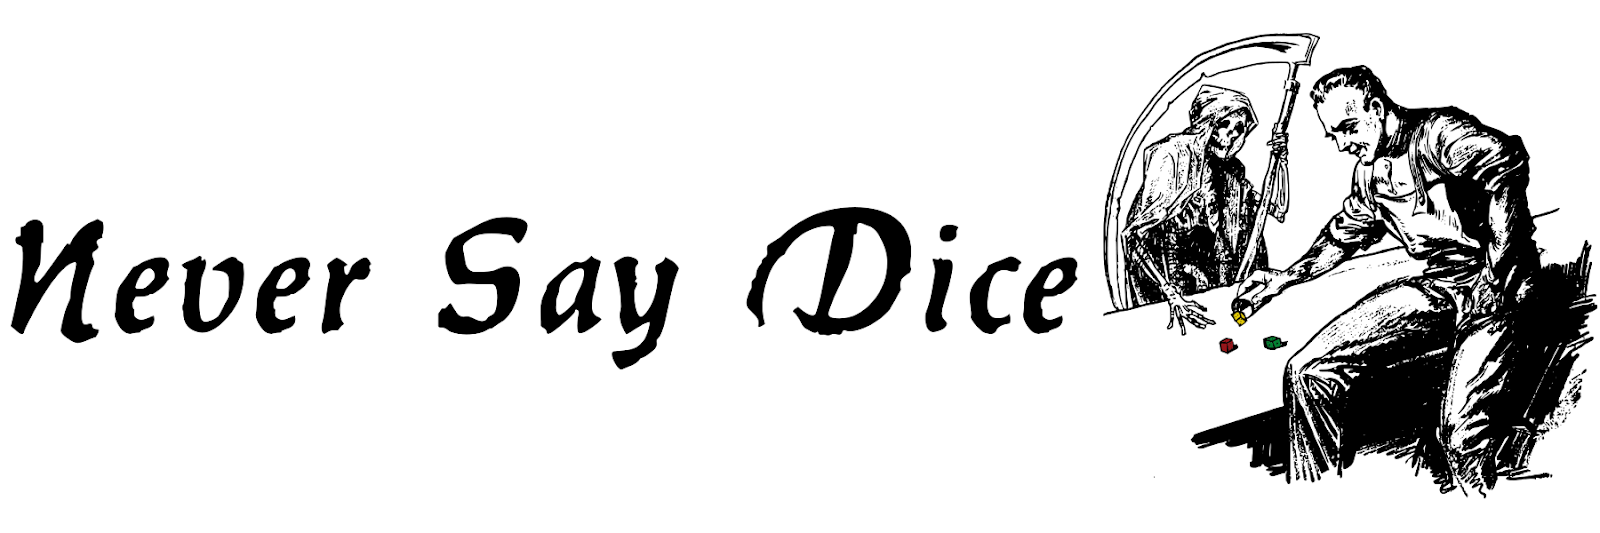 Never Say Dice